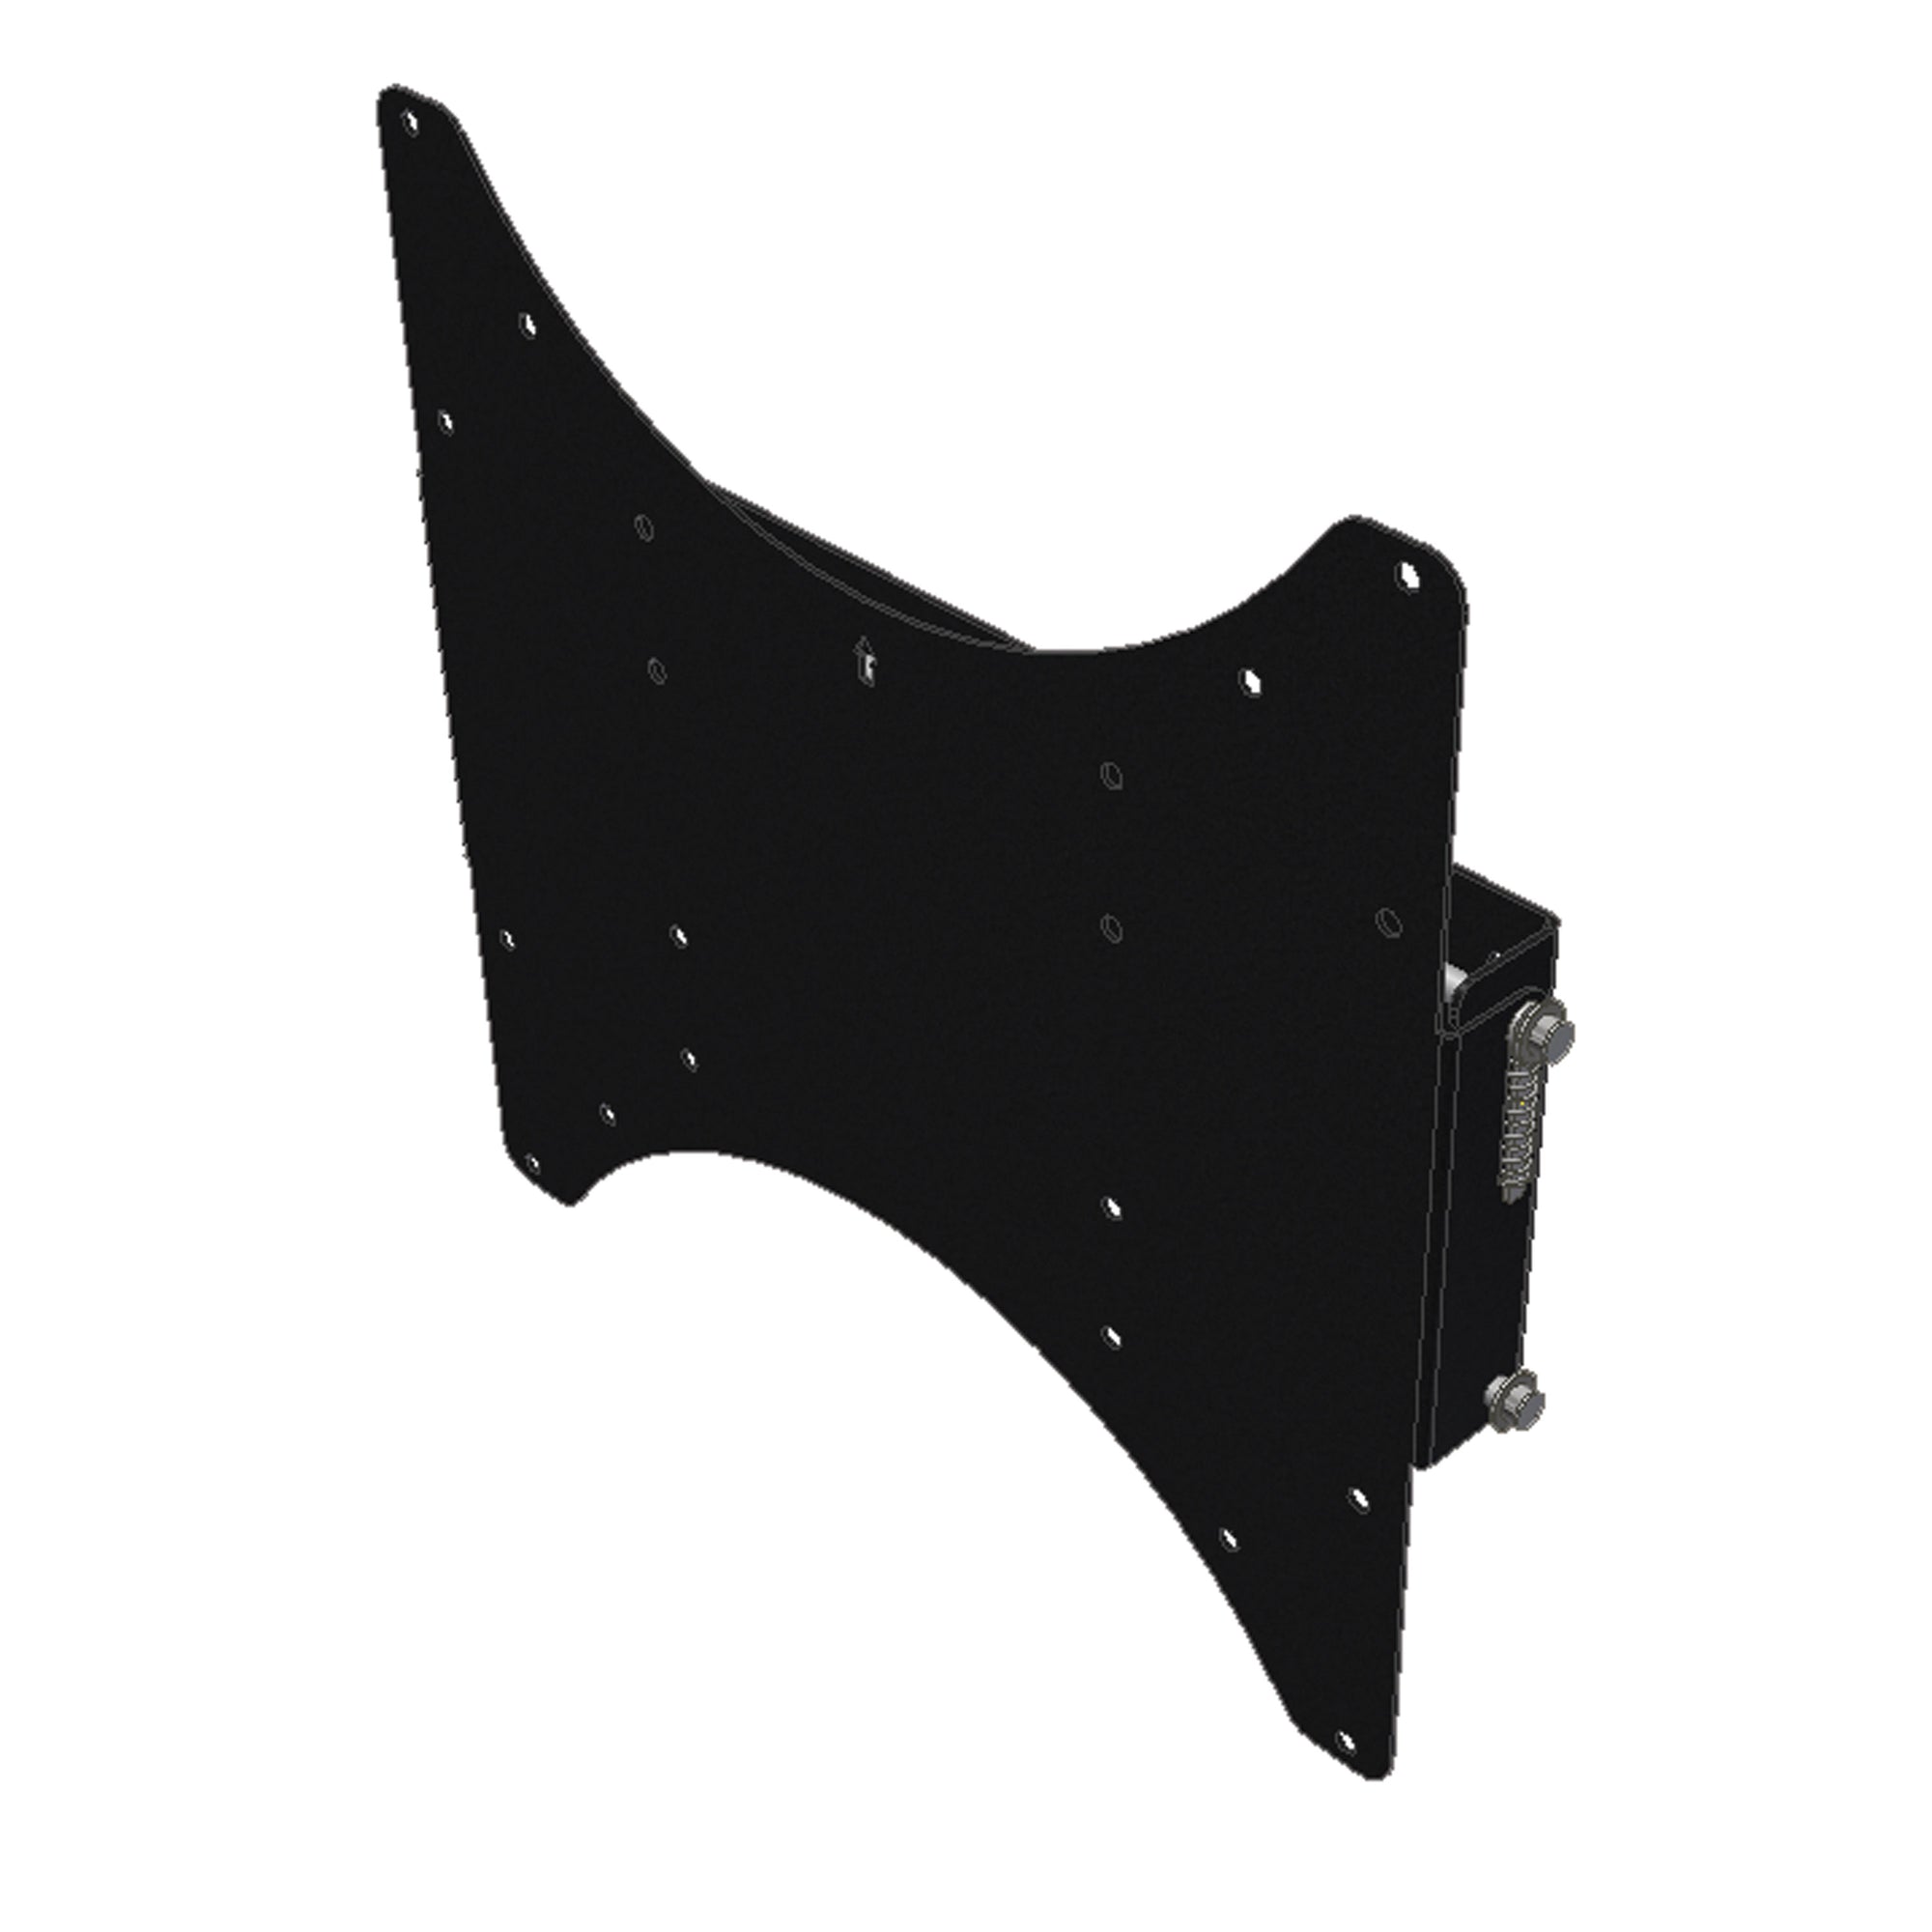 MORryde TV1-048H Snap-In TV Wall Mount